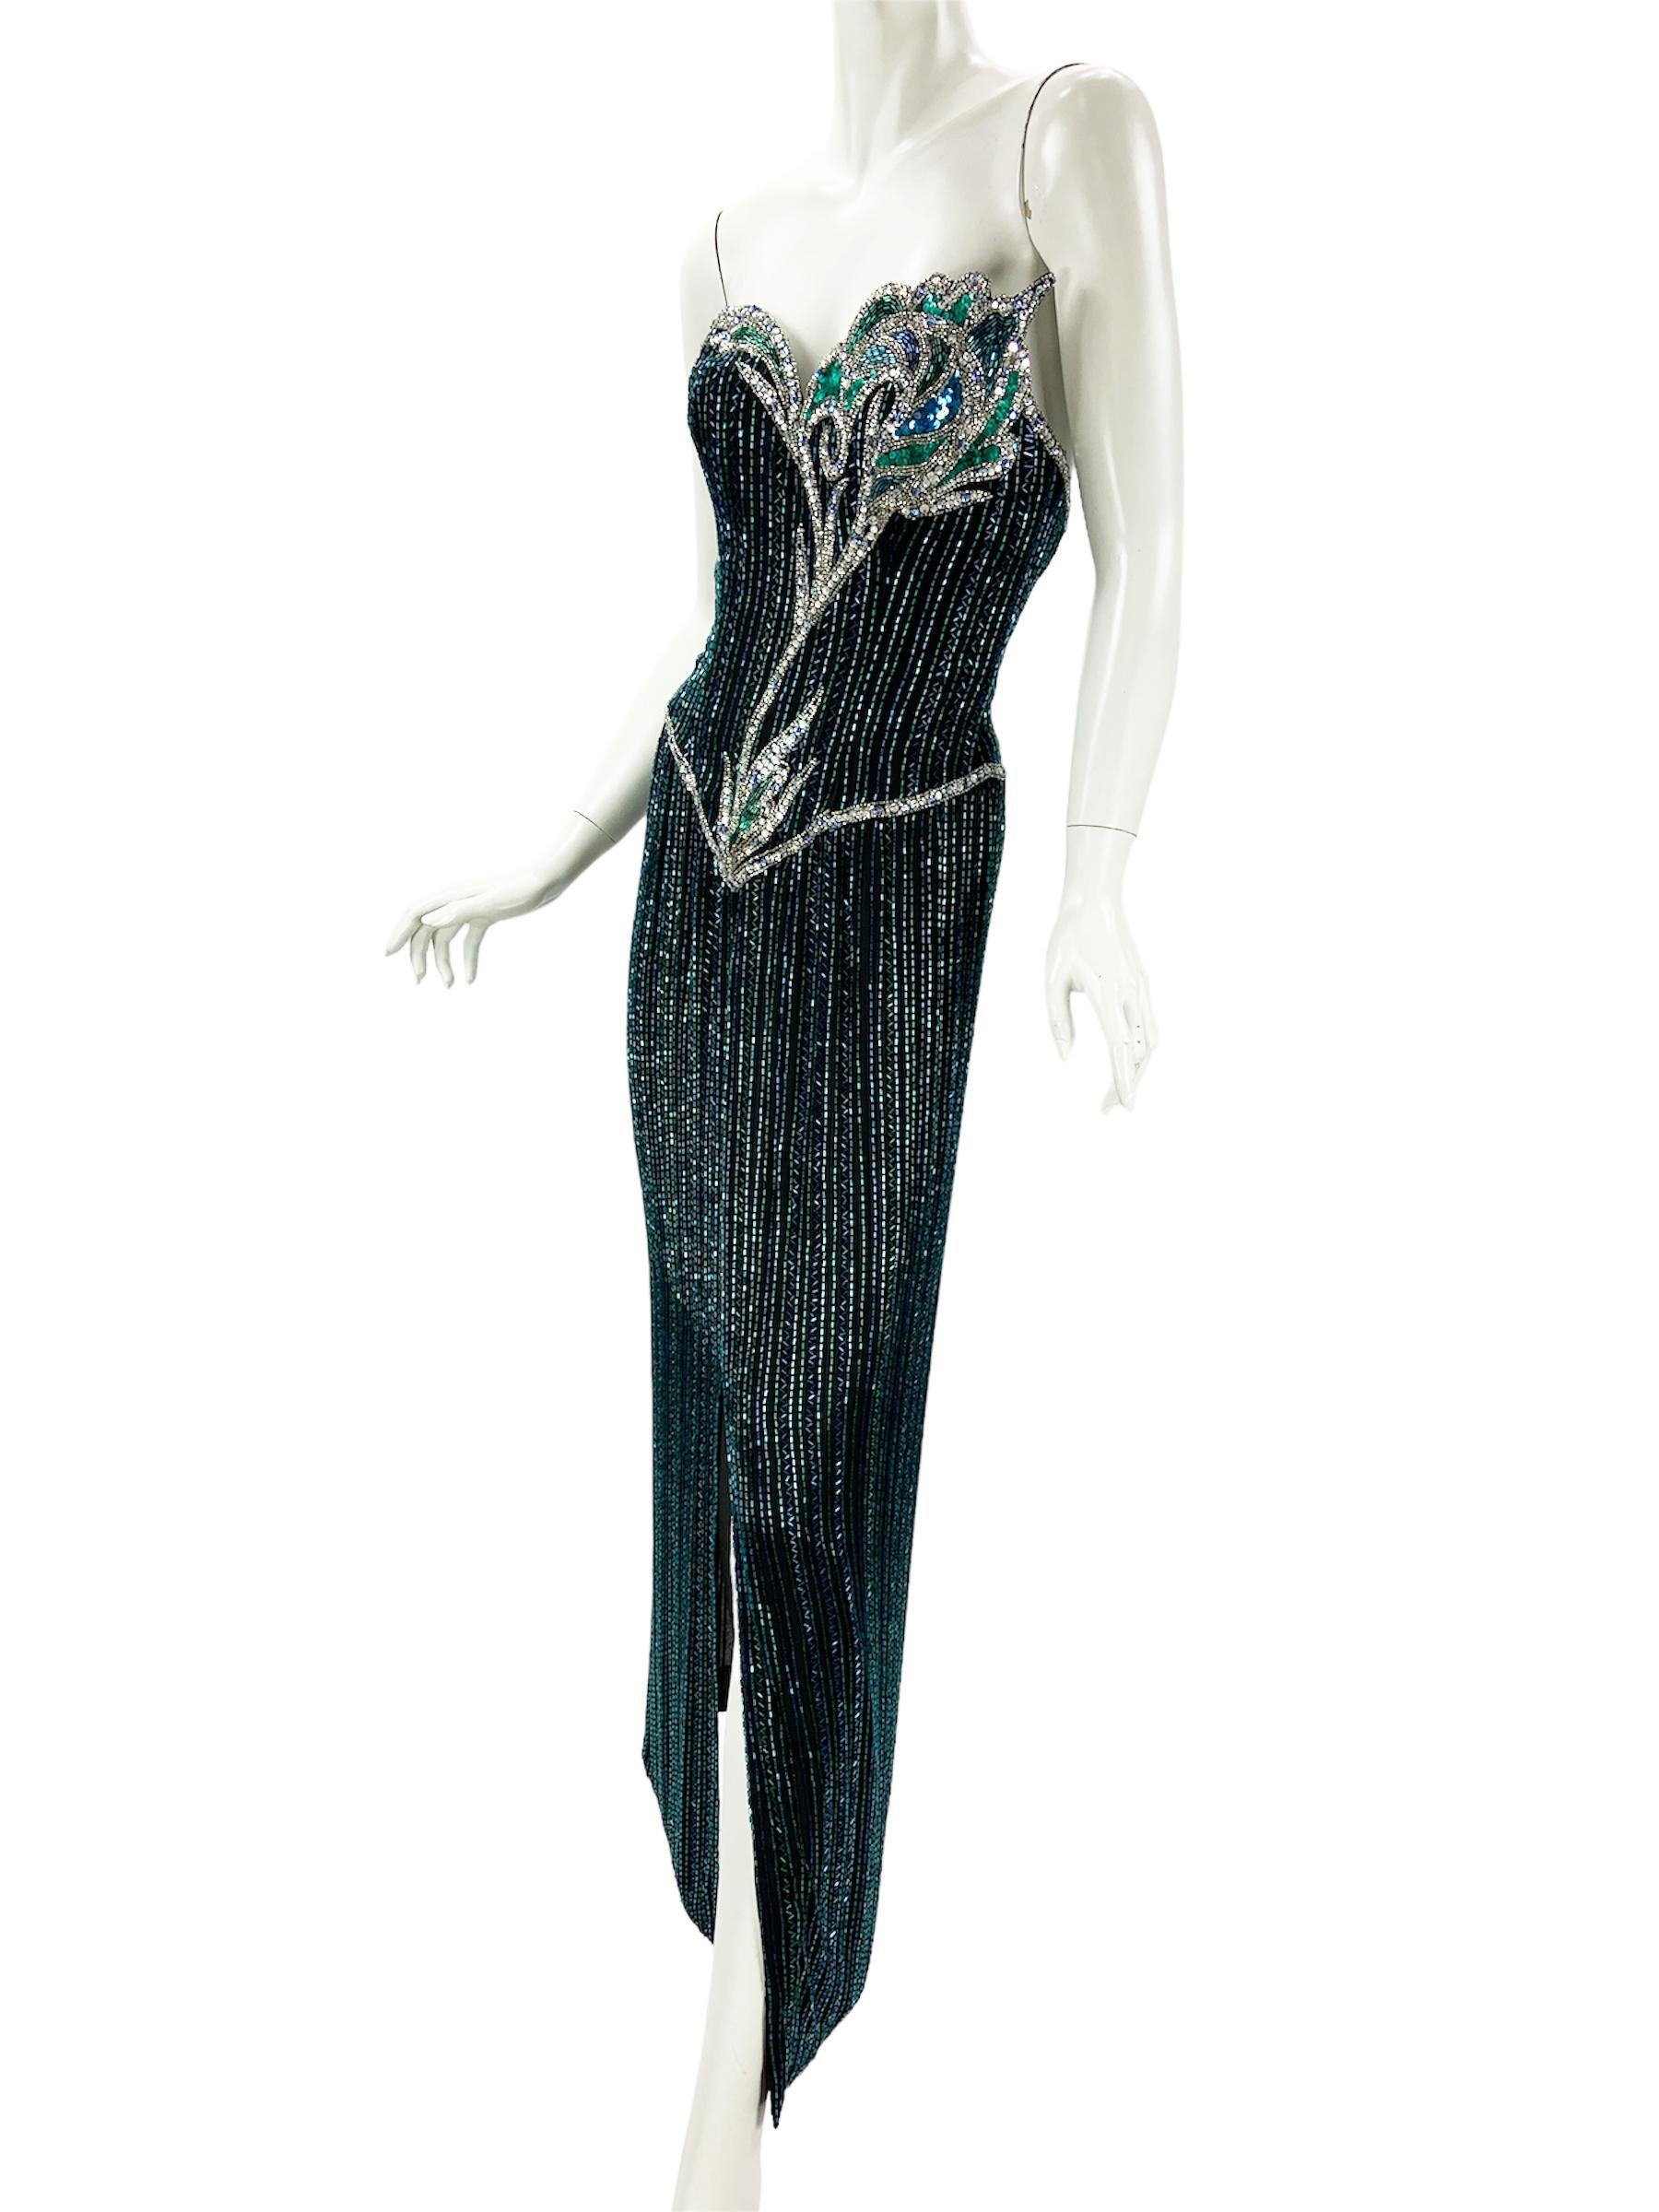 Vintage 80s Bob Mackie Boutique Green Blue Fully Beaded Silk Evening Dress Gown  In Good Condition For Sale In Montgomery, TX